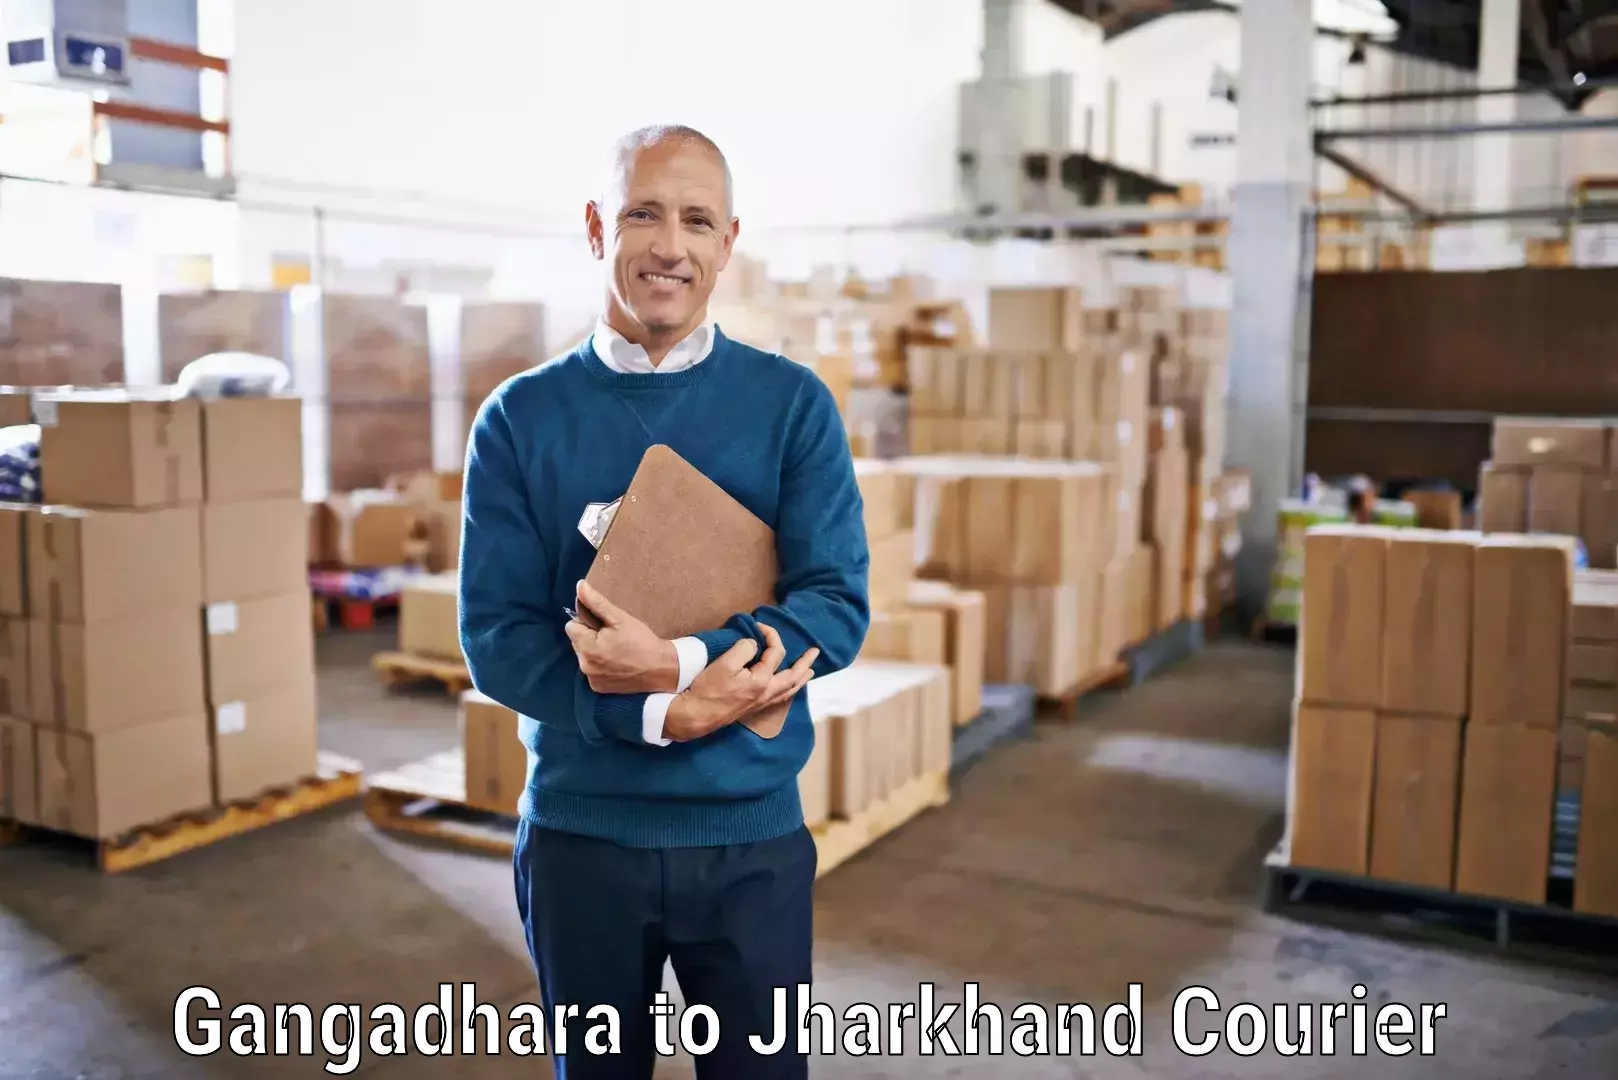 Express delivery solutions Gangadhara to Kedla